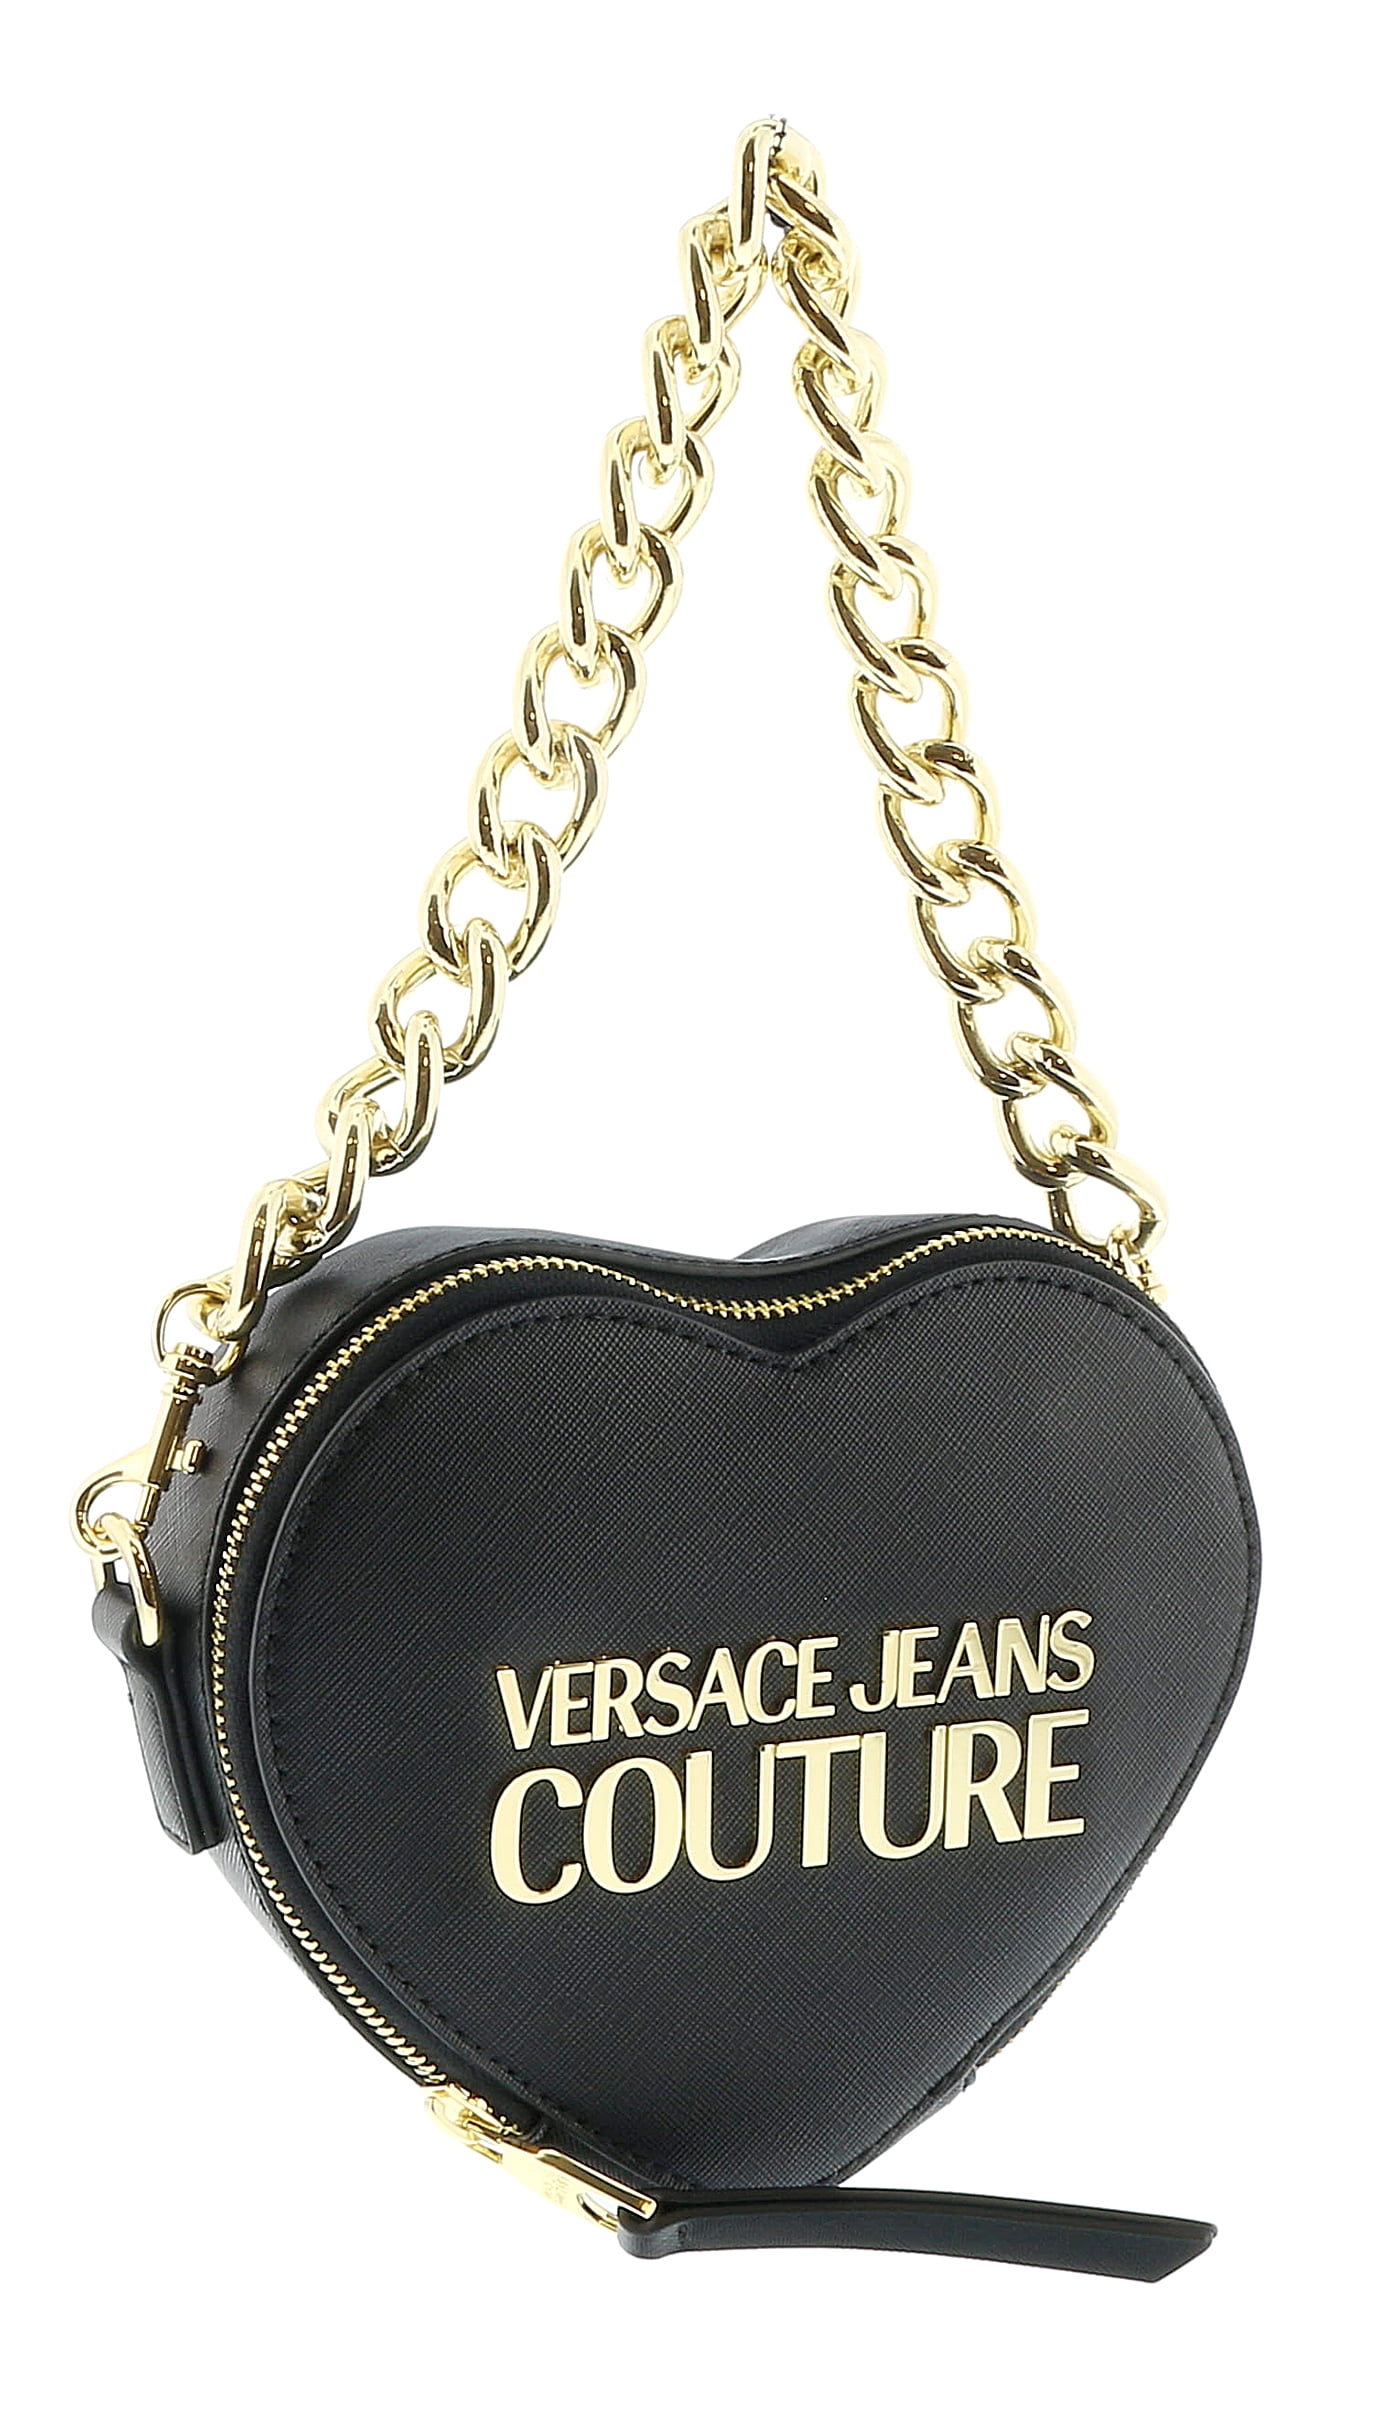 Versace Jeans Couture Heart Bag